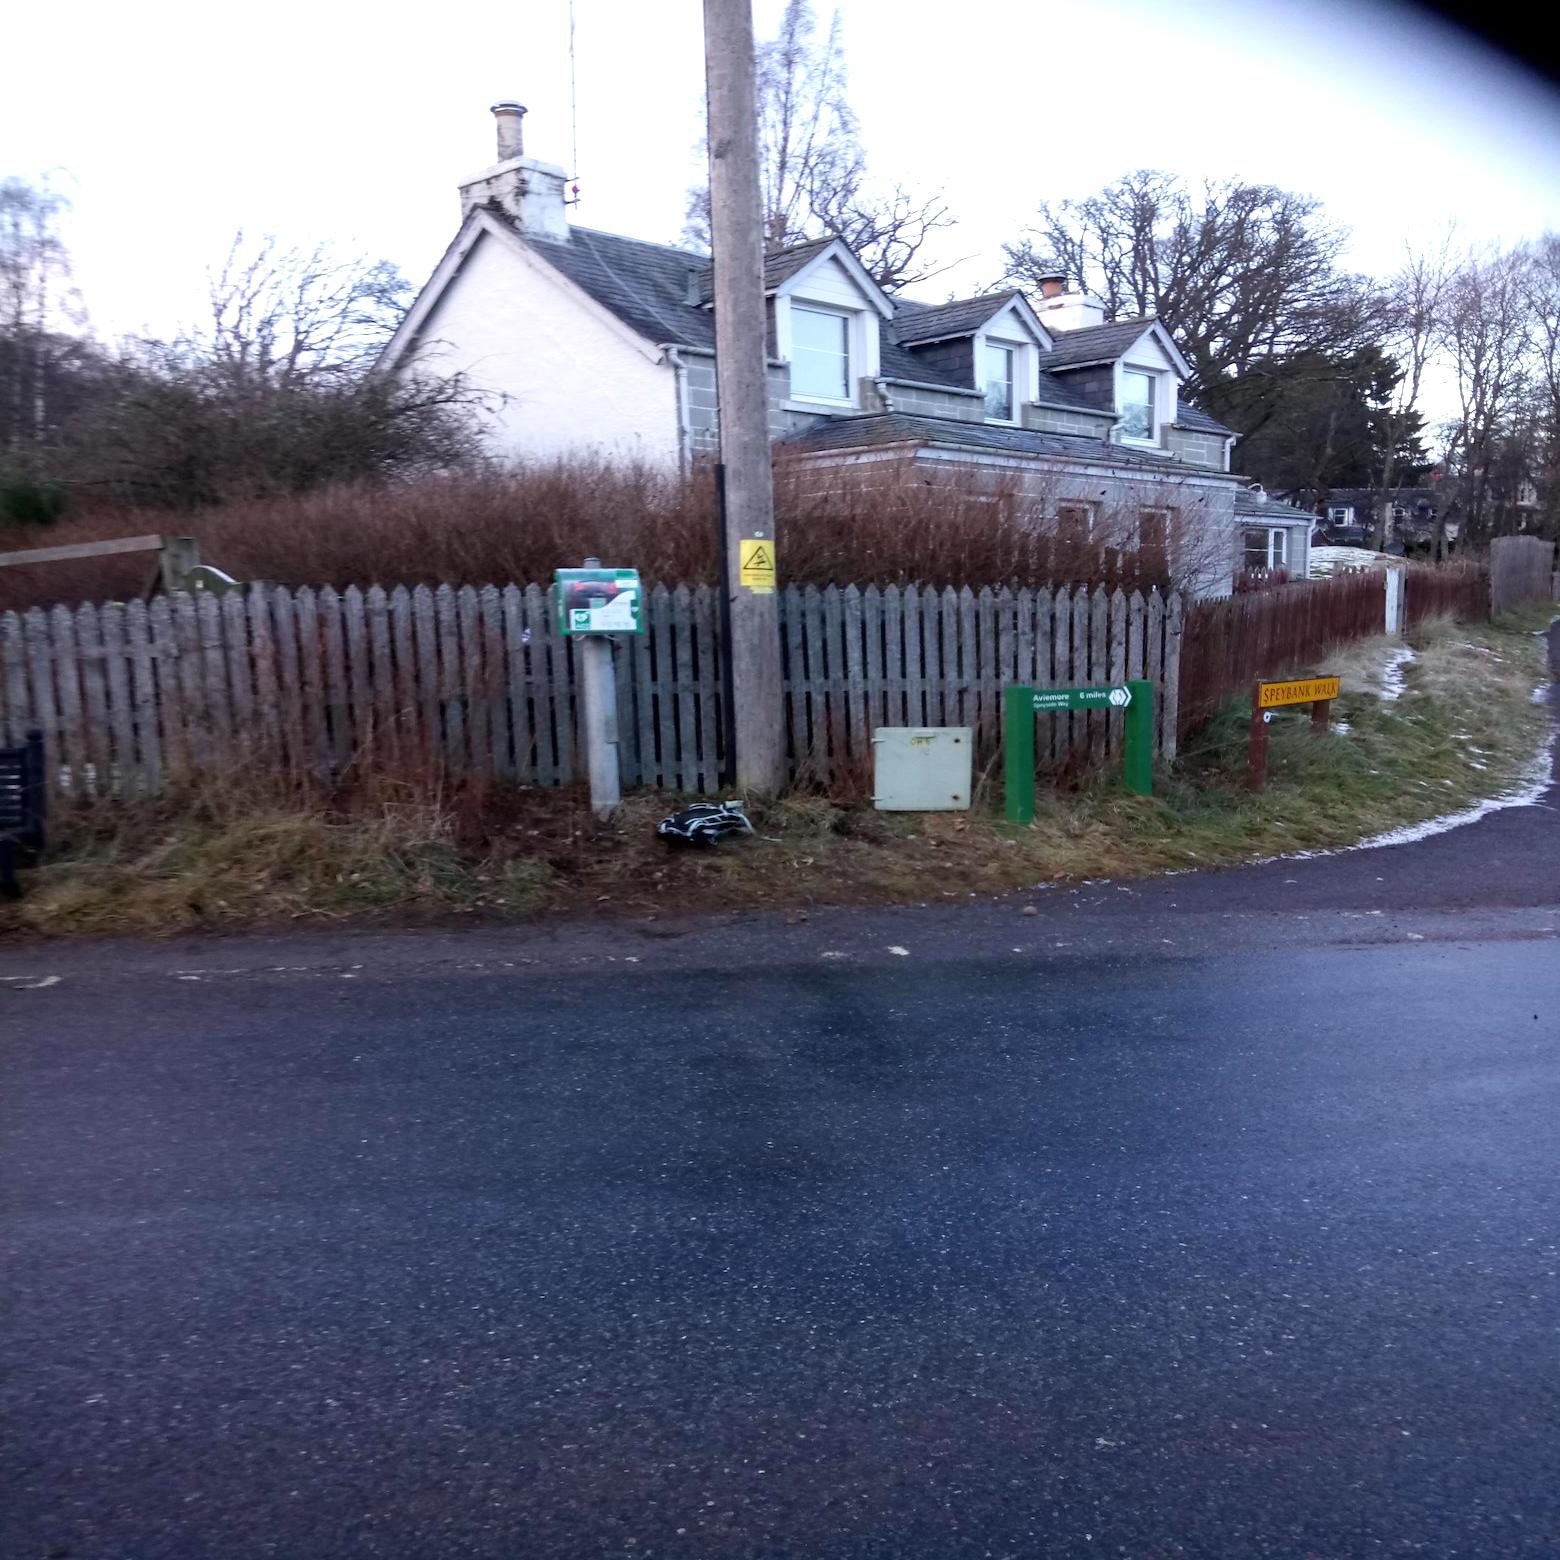 Defib at The Brae and Speyside Walk Junction, Kincraig